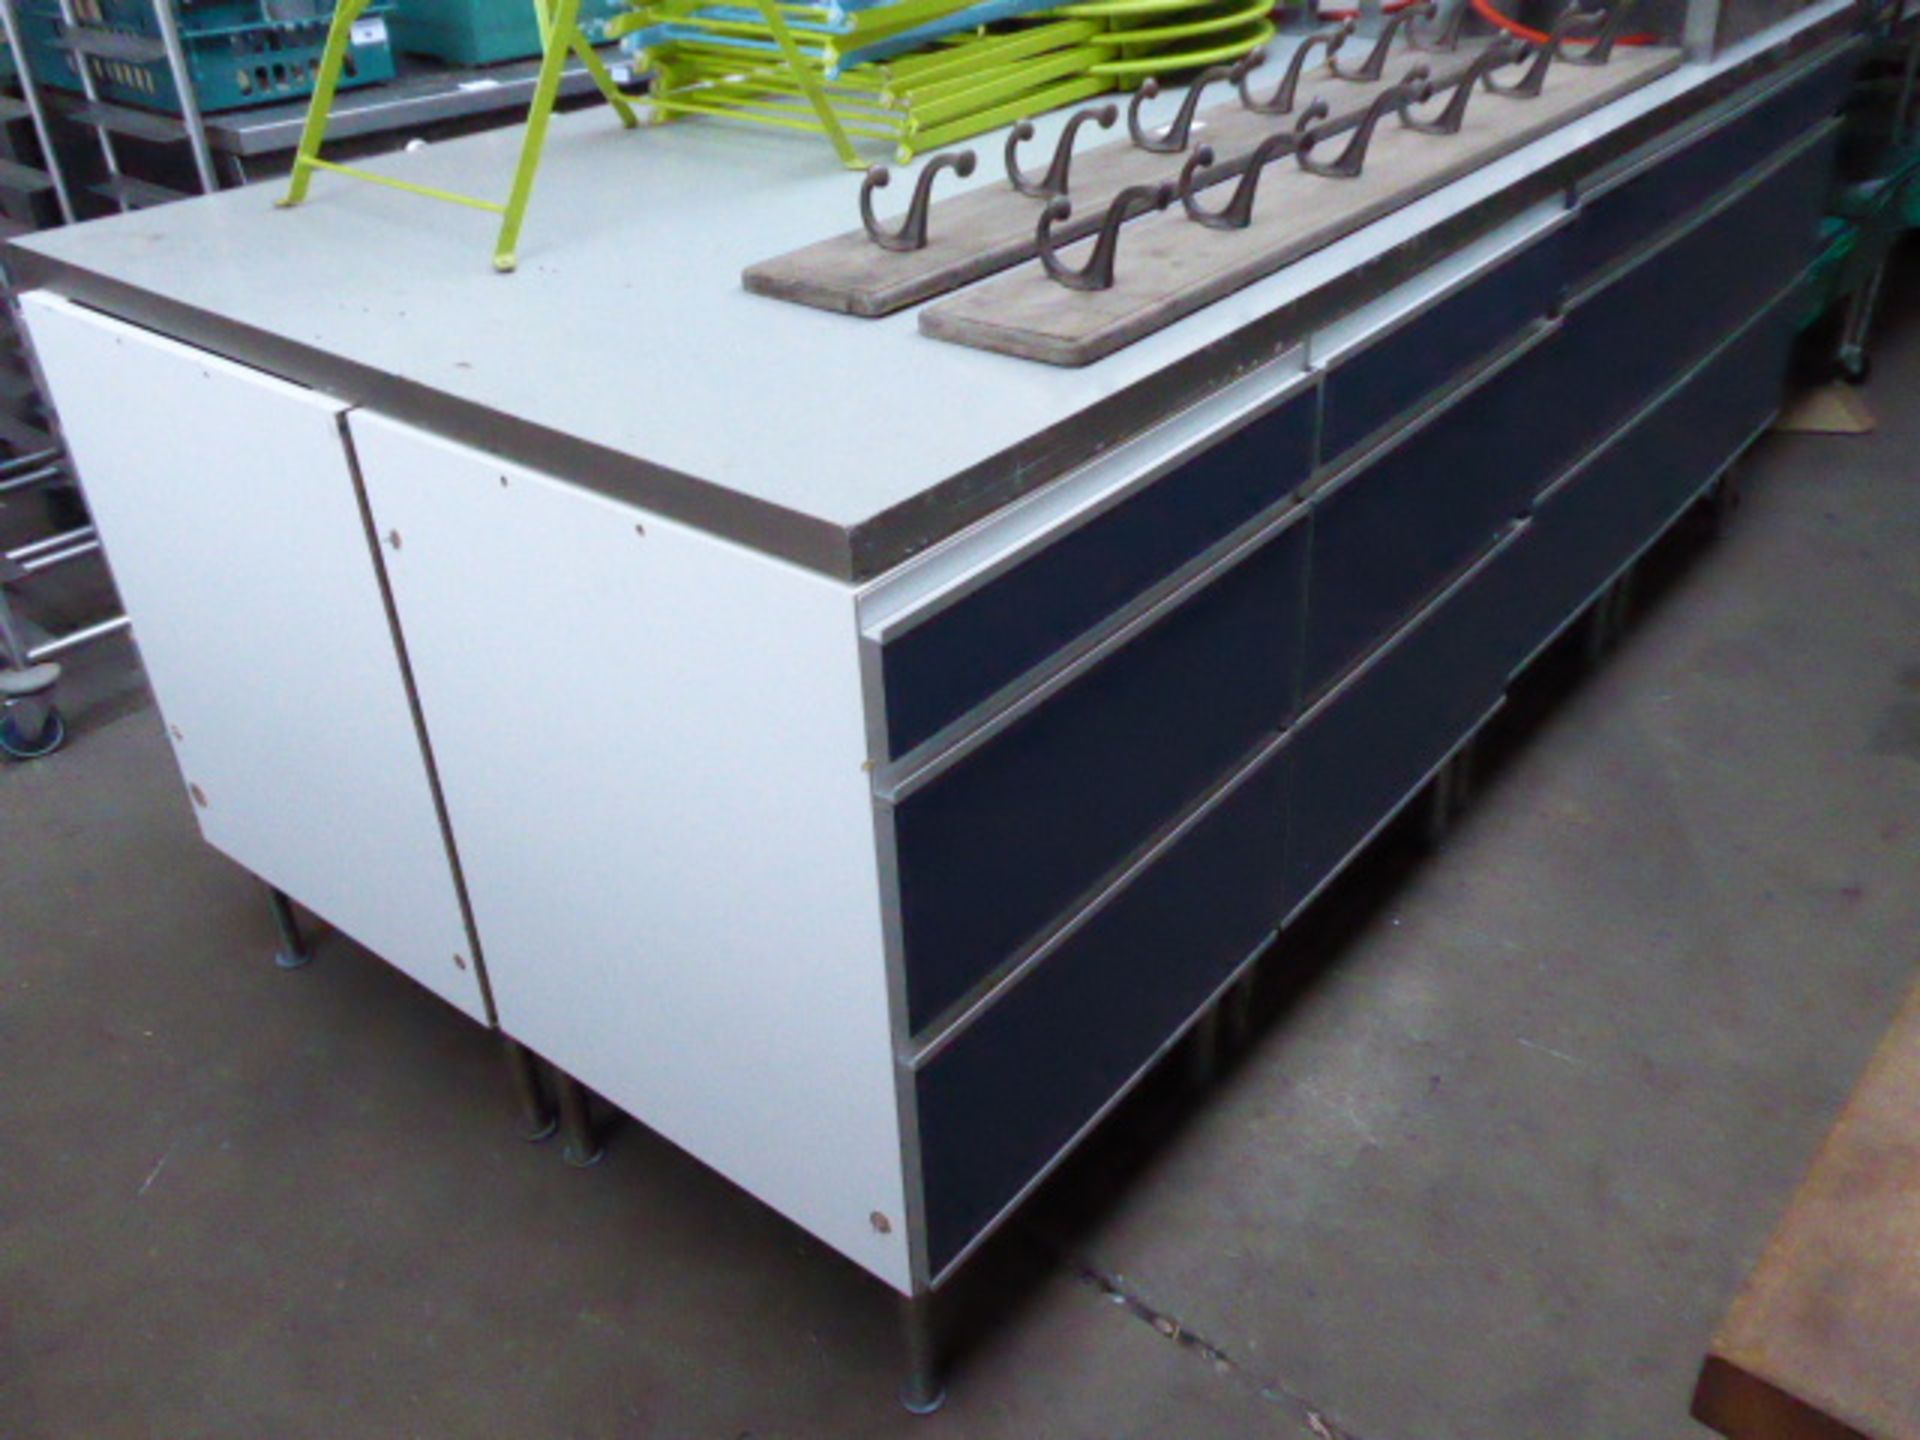 245cm by 120cm kitchen island in modular form, four sections under and grey work surface - Image 3 of 3